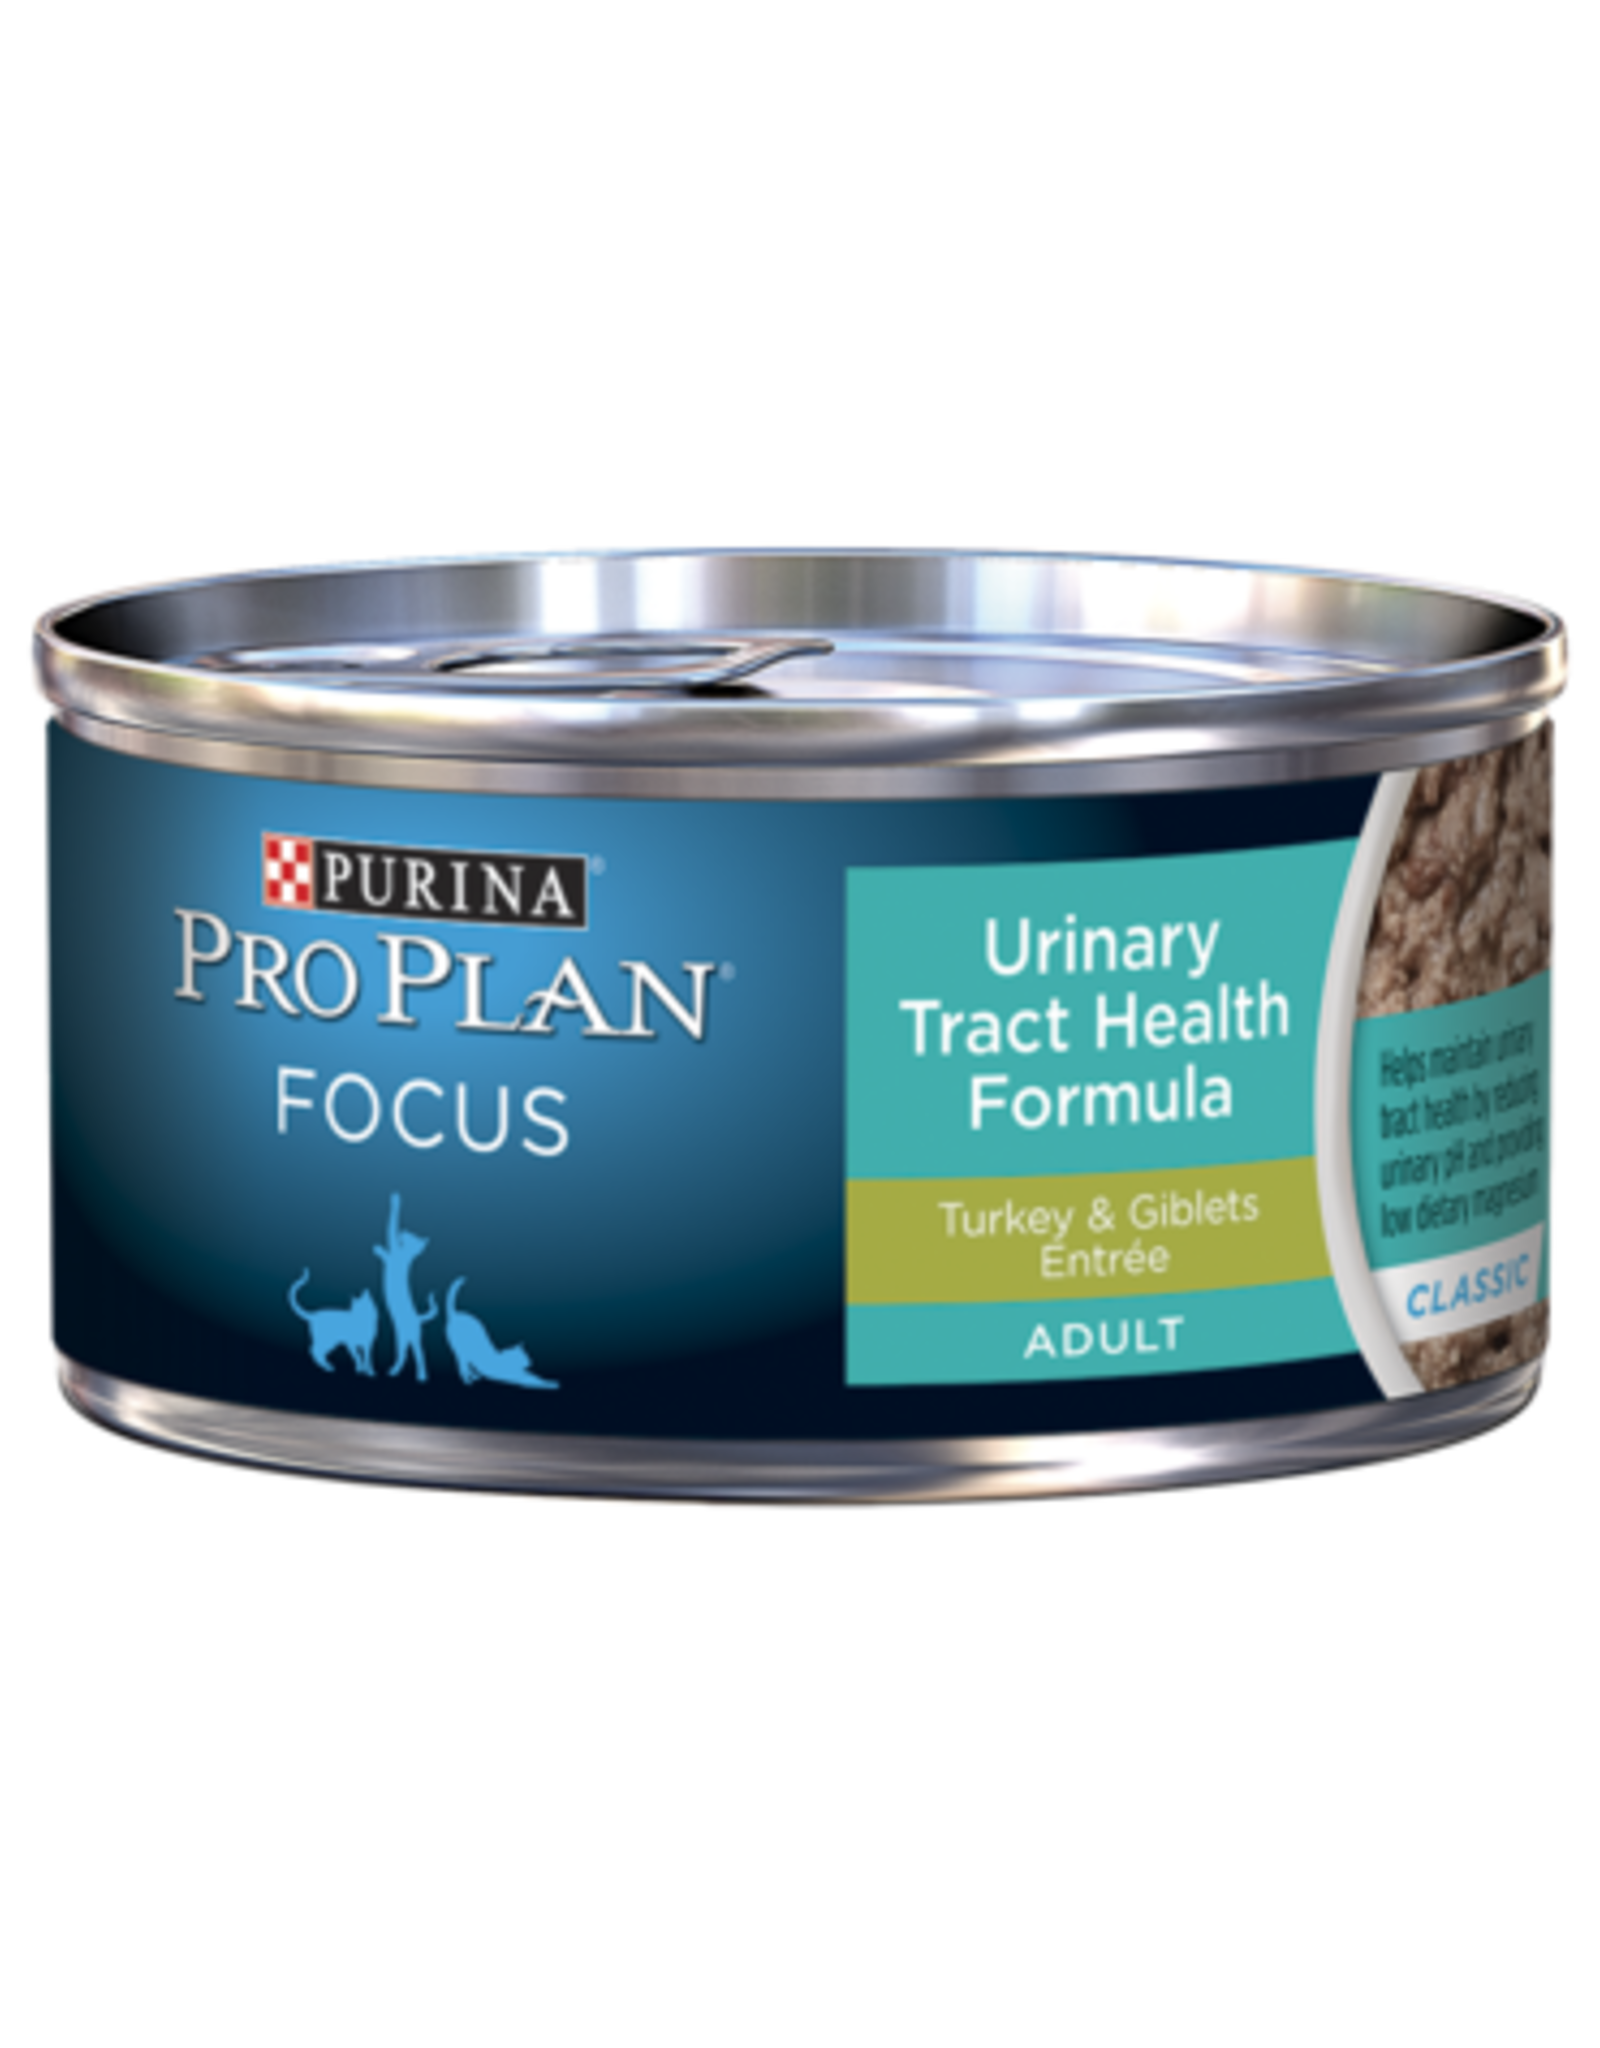 NESTLE PURINA PETCARE PRO PLAN CAT CAN URINARY TRACT TURKEY & GIBLETS 3OZ CASE OF 24